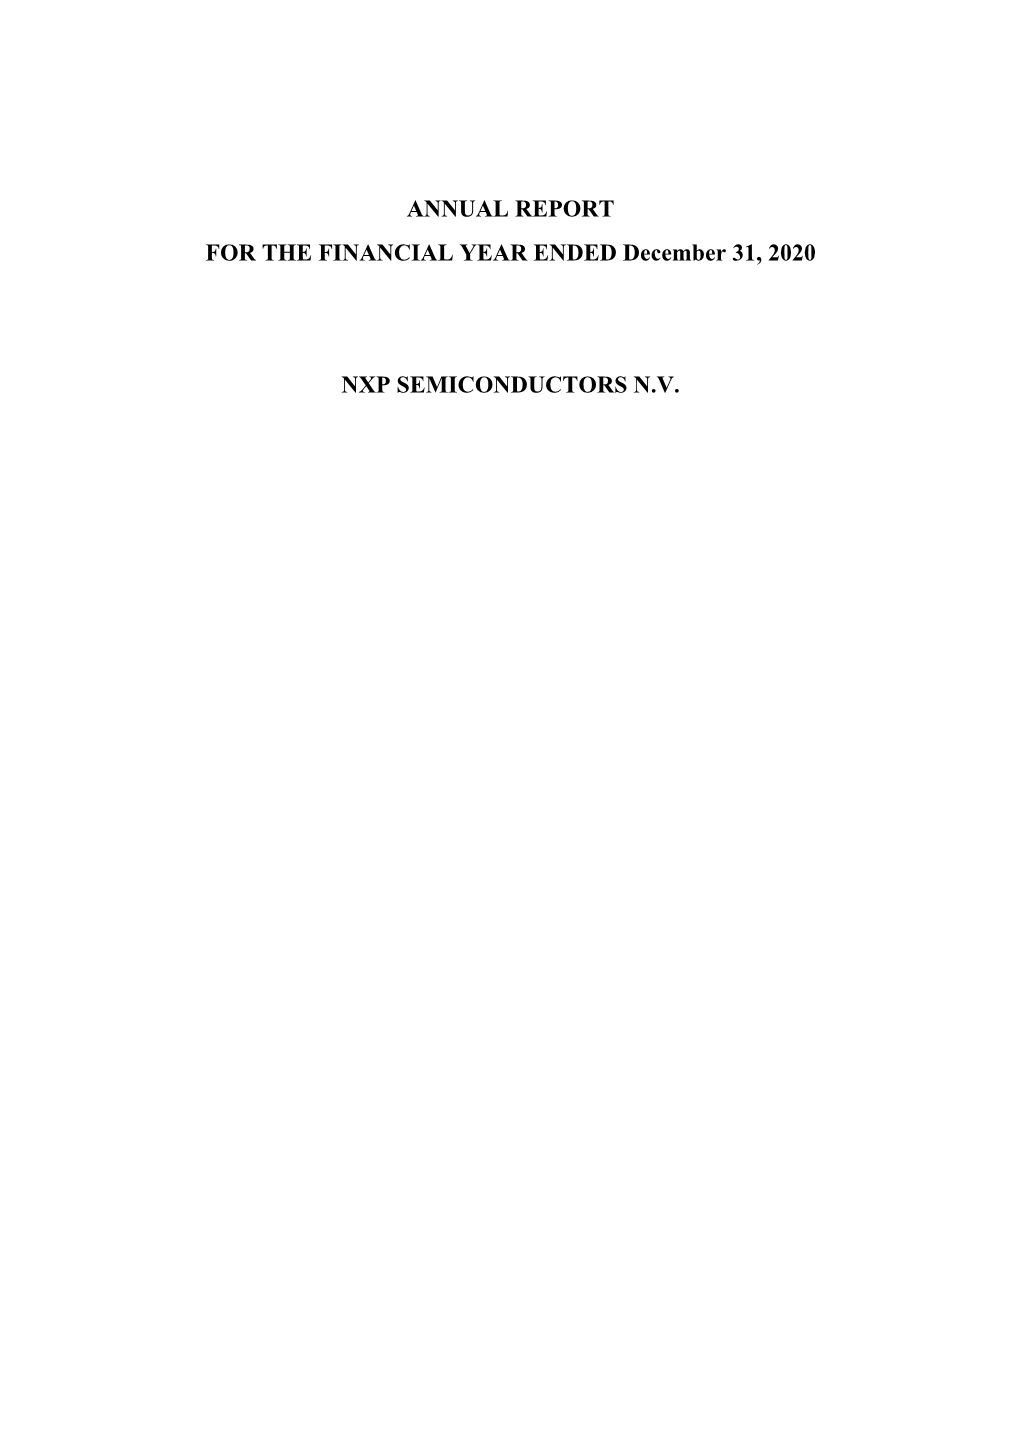 ANNUAL REPORT for the FINANCIAL YEAR ENDED December 31, 2020 NXP SEMICONDUCTORS N.V